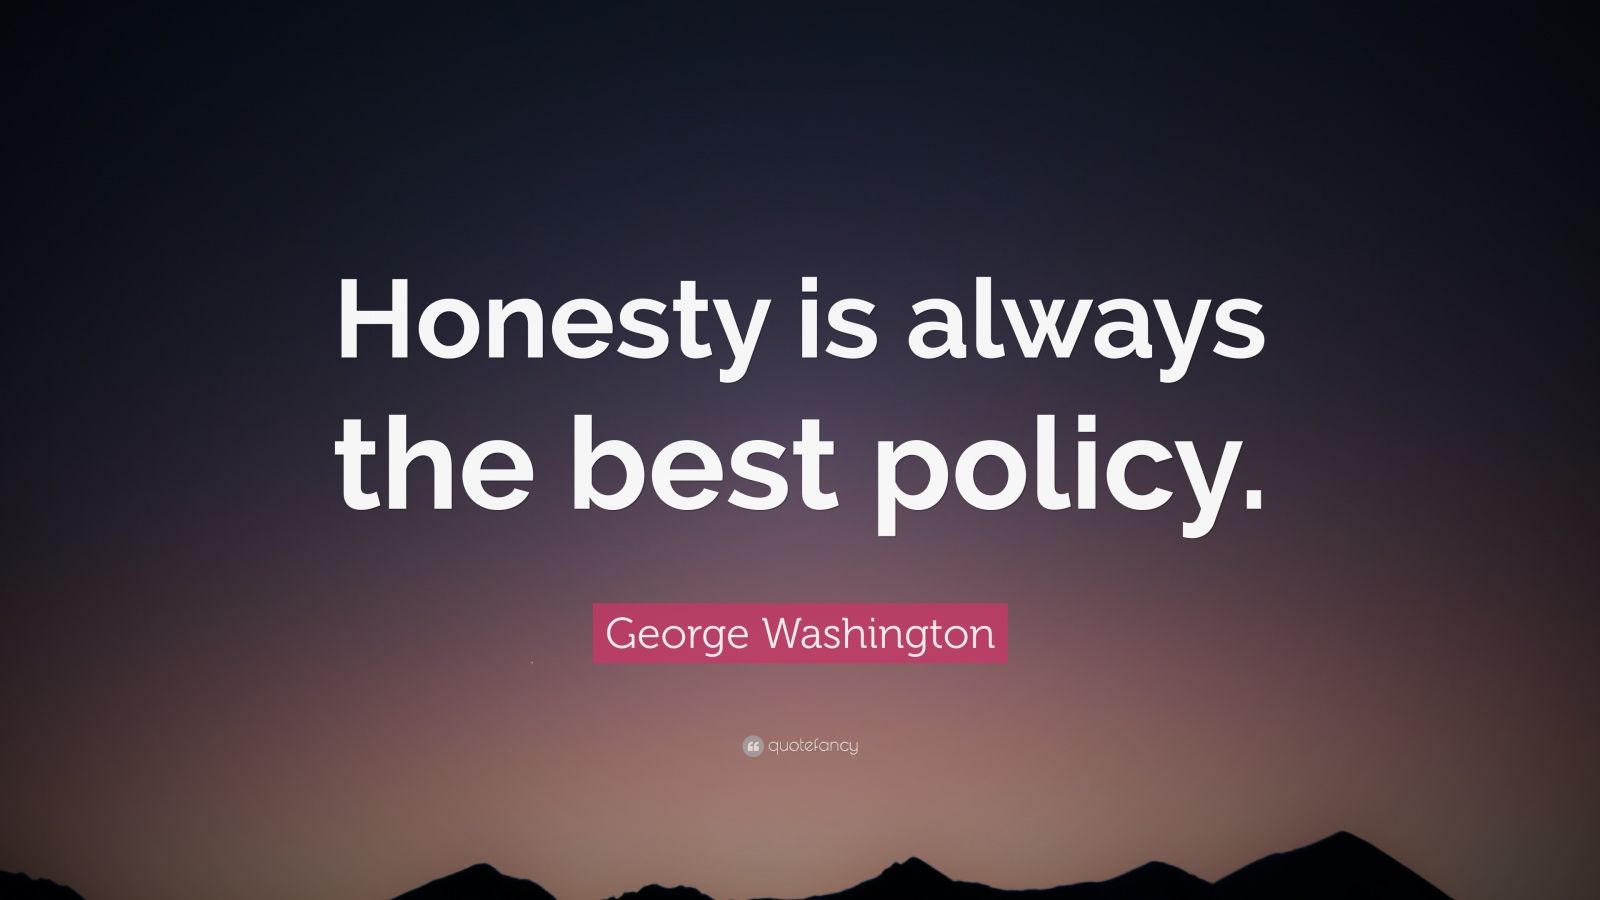 George Washington Quote: “Honesty is always the best policy.” (12